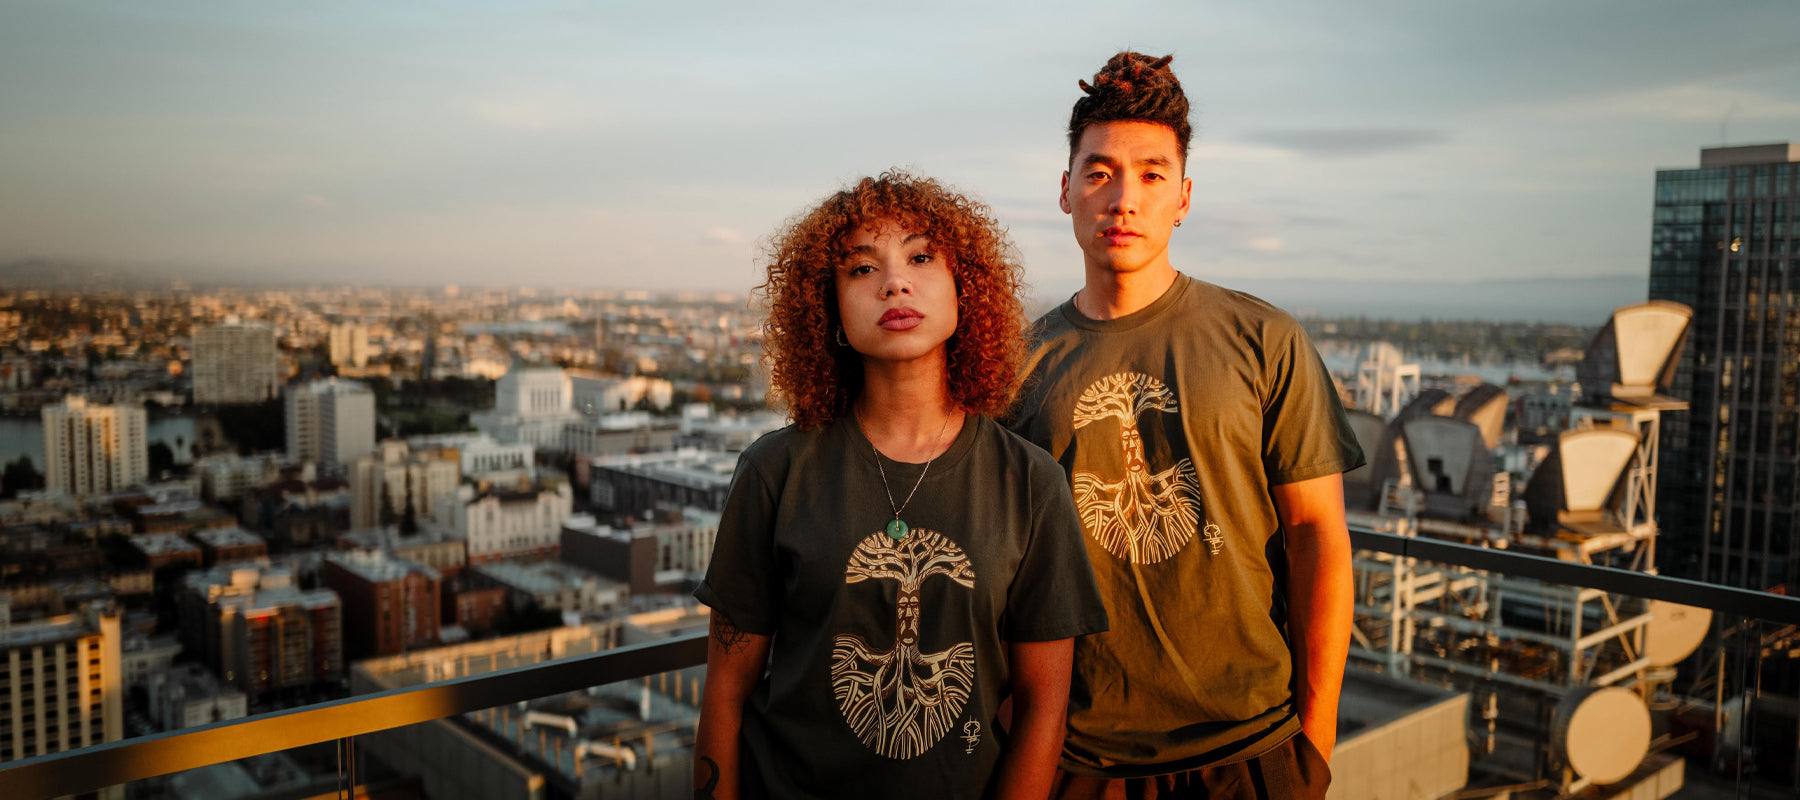 A man and woman on an Oakland rooftop in a cypress green t-shirt with an Oaklandish logo rendered by artist Timothy Bluitt.